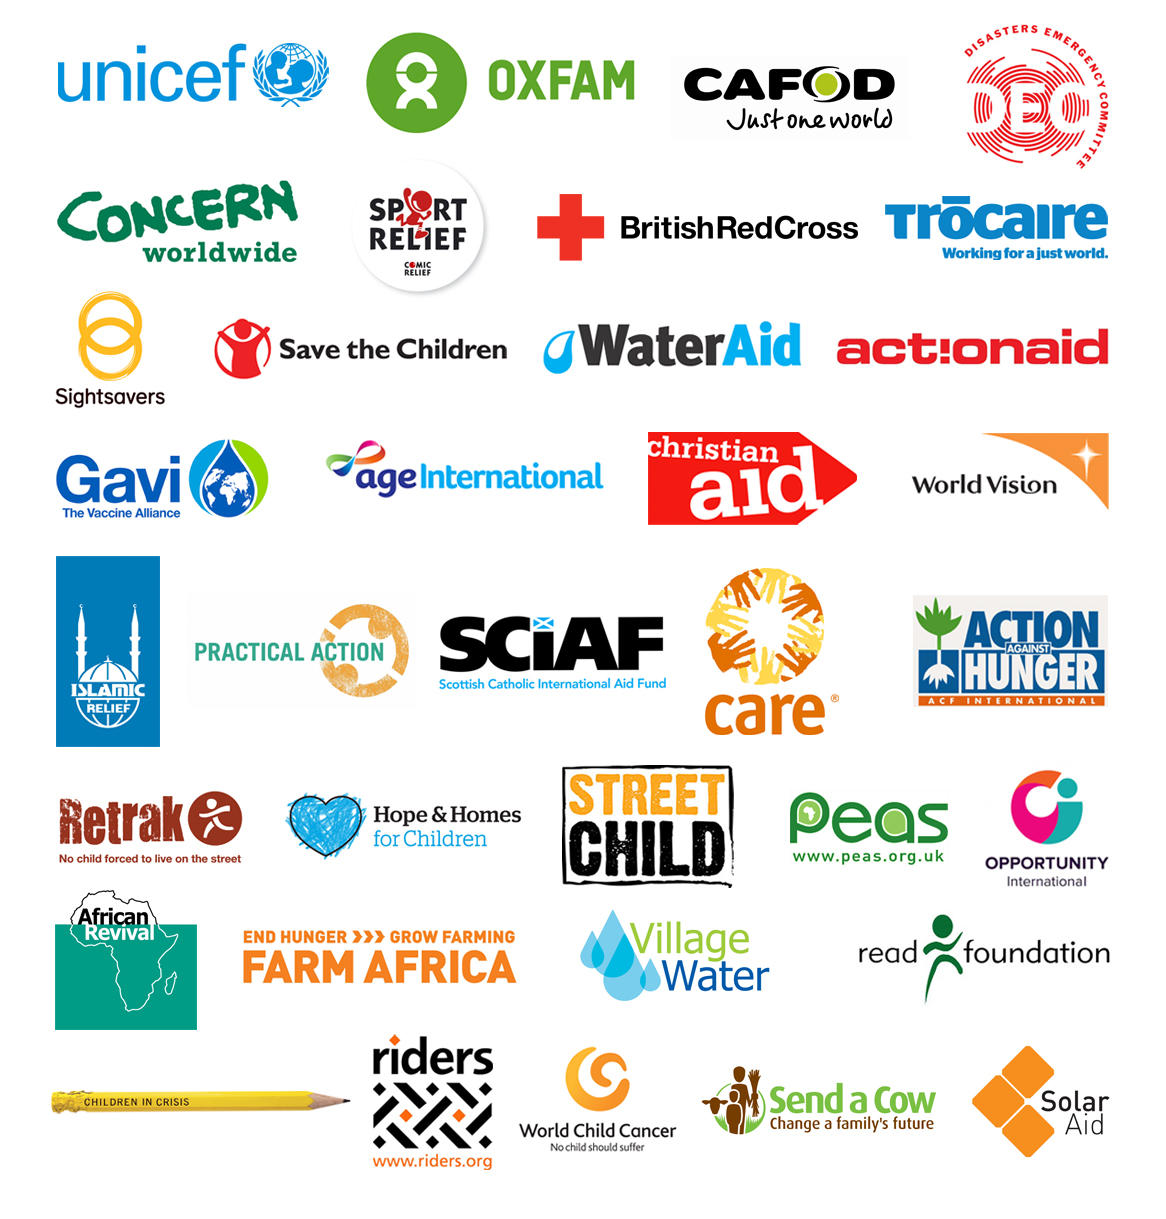 Groups that have benefited: Unicef, Oxfam, Islamic Relief, Save the Children, Water Aid, Care, Action Aid, others